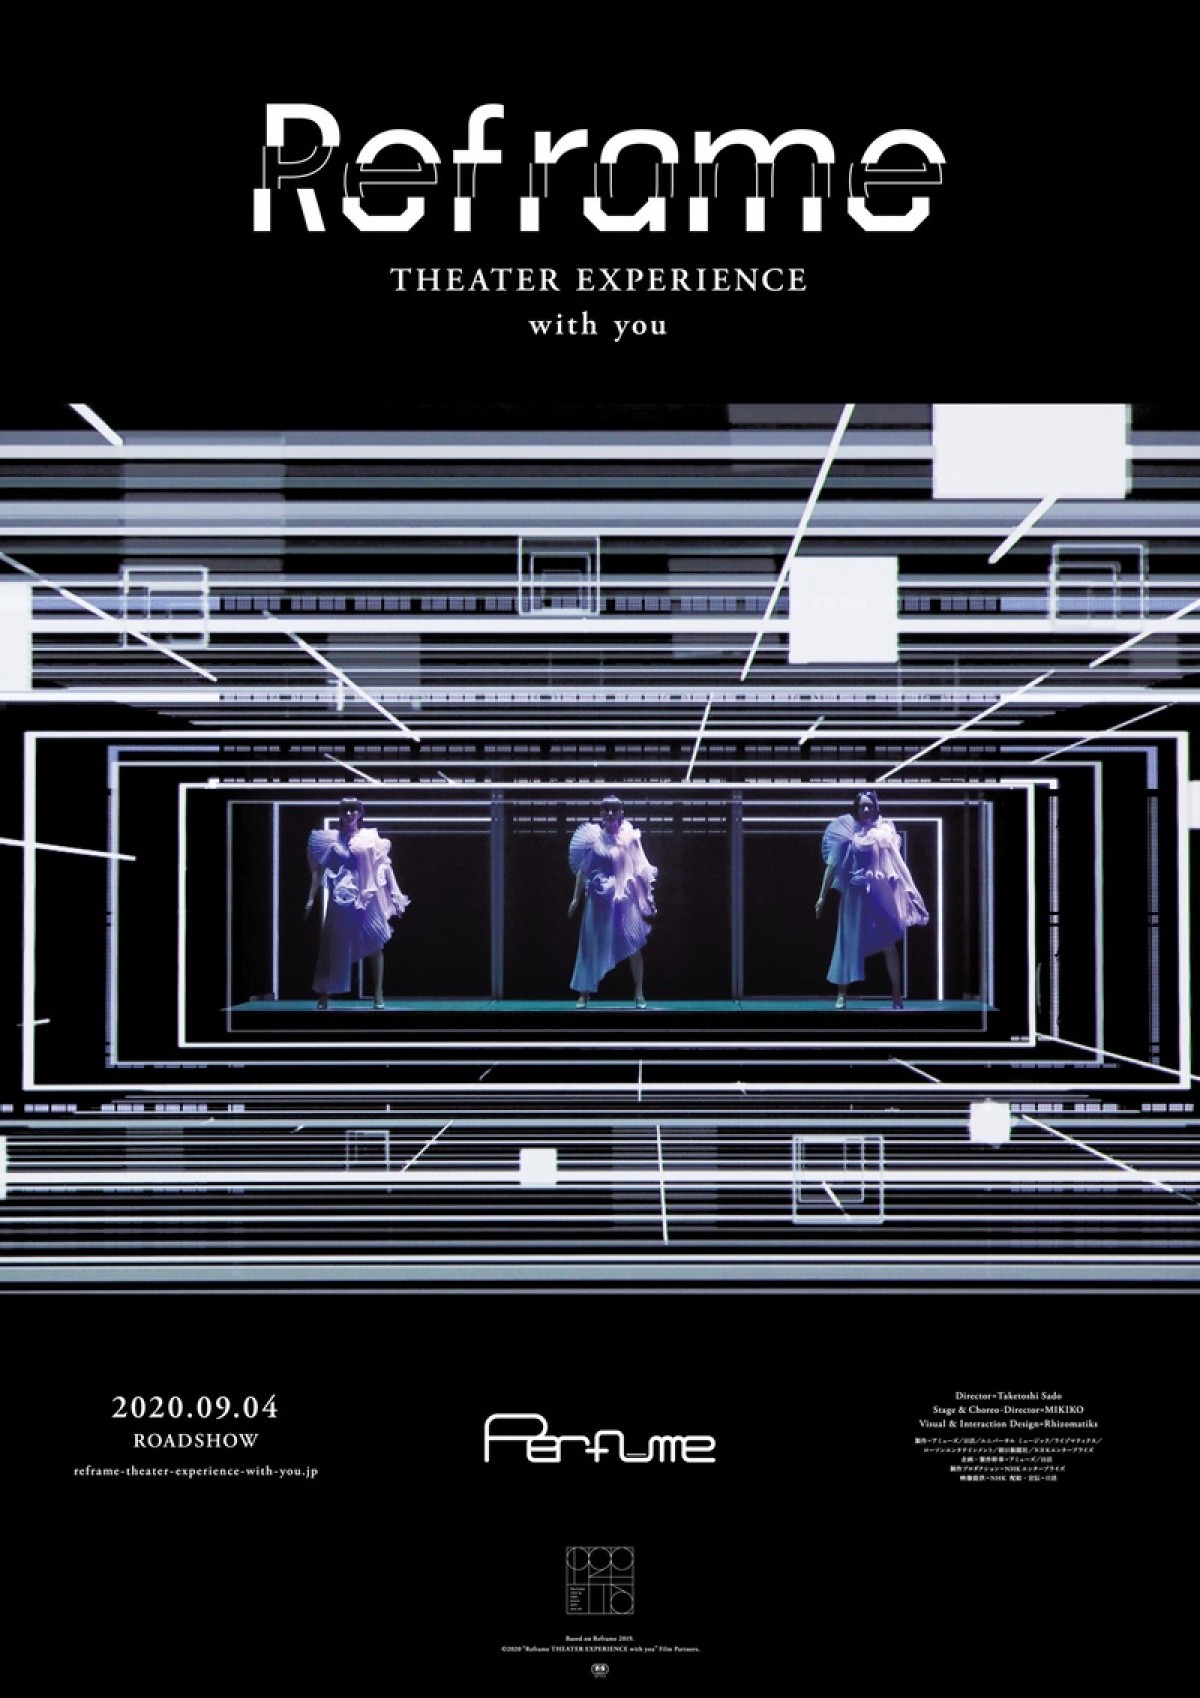 Perfume、アニバーサリーイヤーの締めくくり！映画『Reframe THEATER EXPERIENCE with you』公開